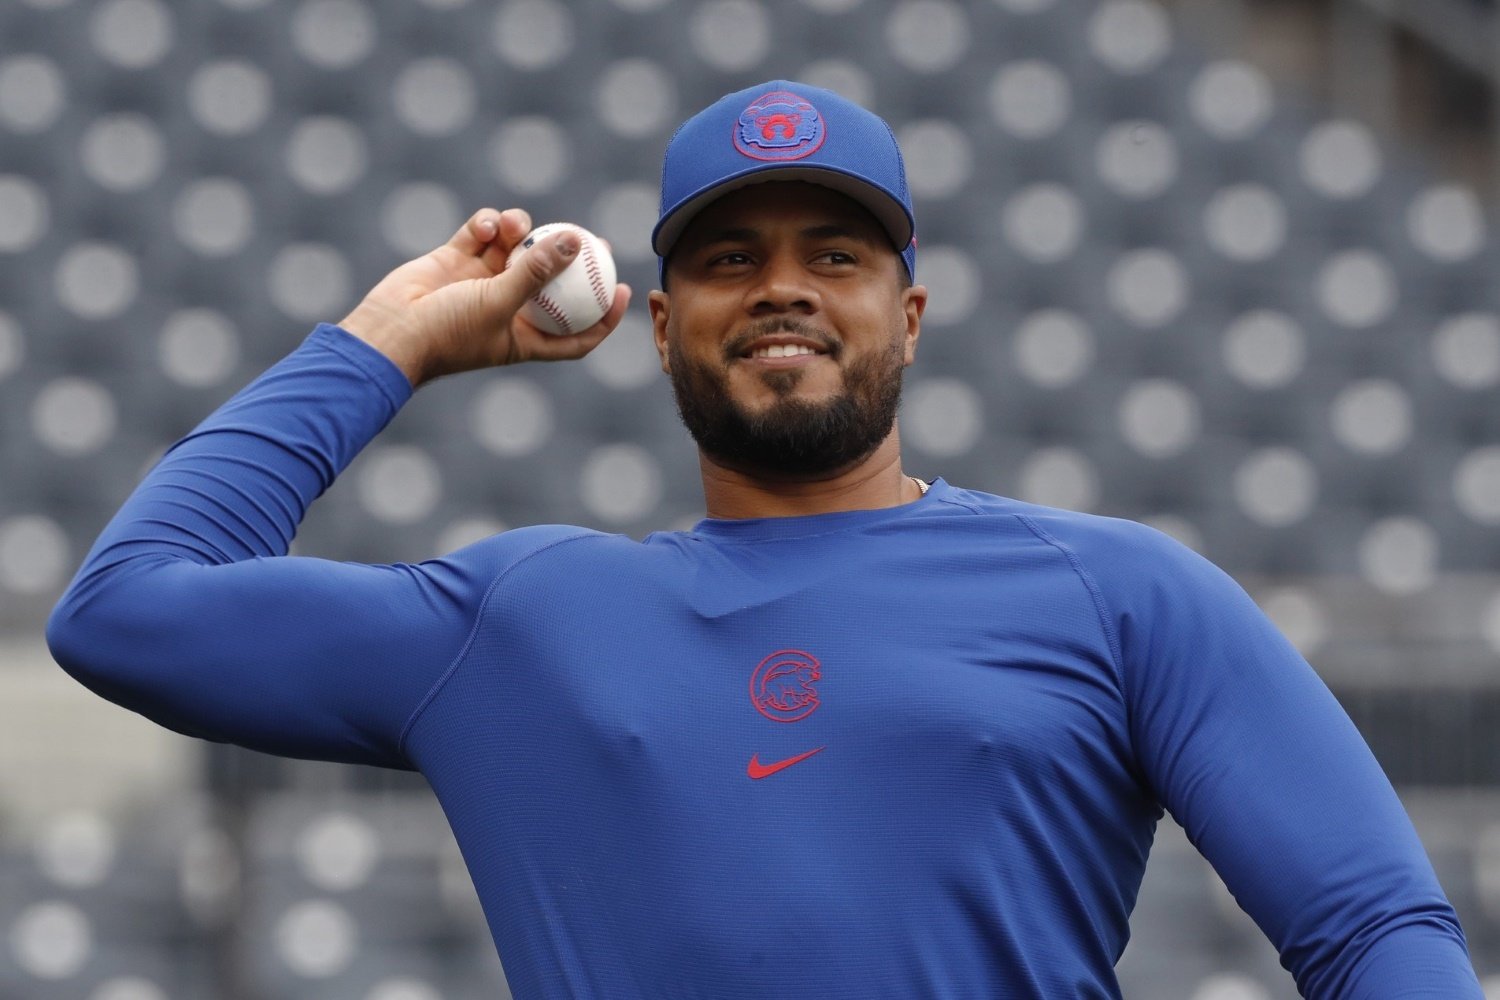 Cubs Injury Updates: Nick Madrigal to IL, Adbert Alzolay Long Tossing, and  More